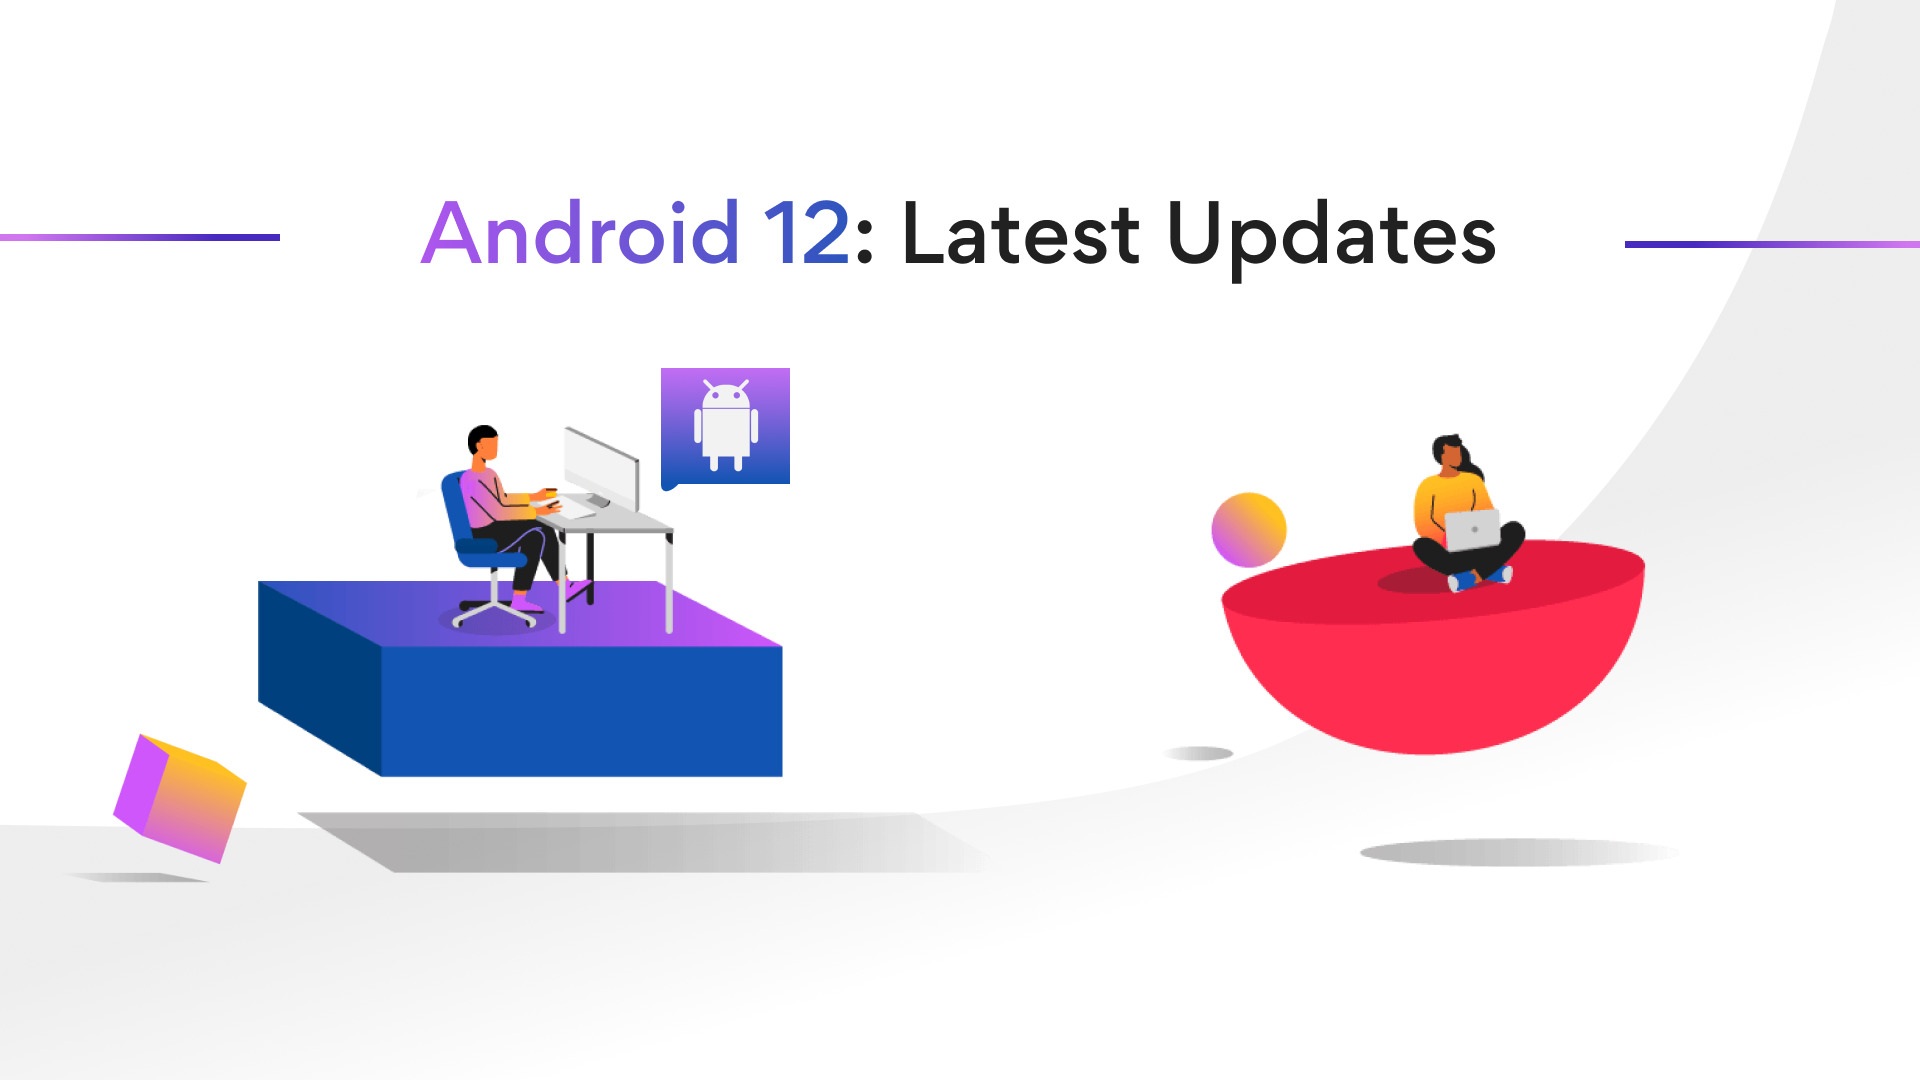 Android 12 best features and updates